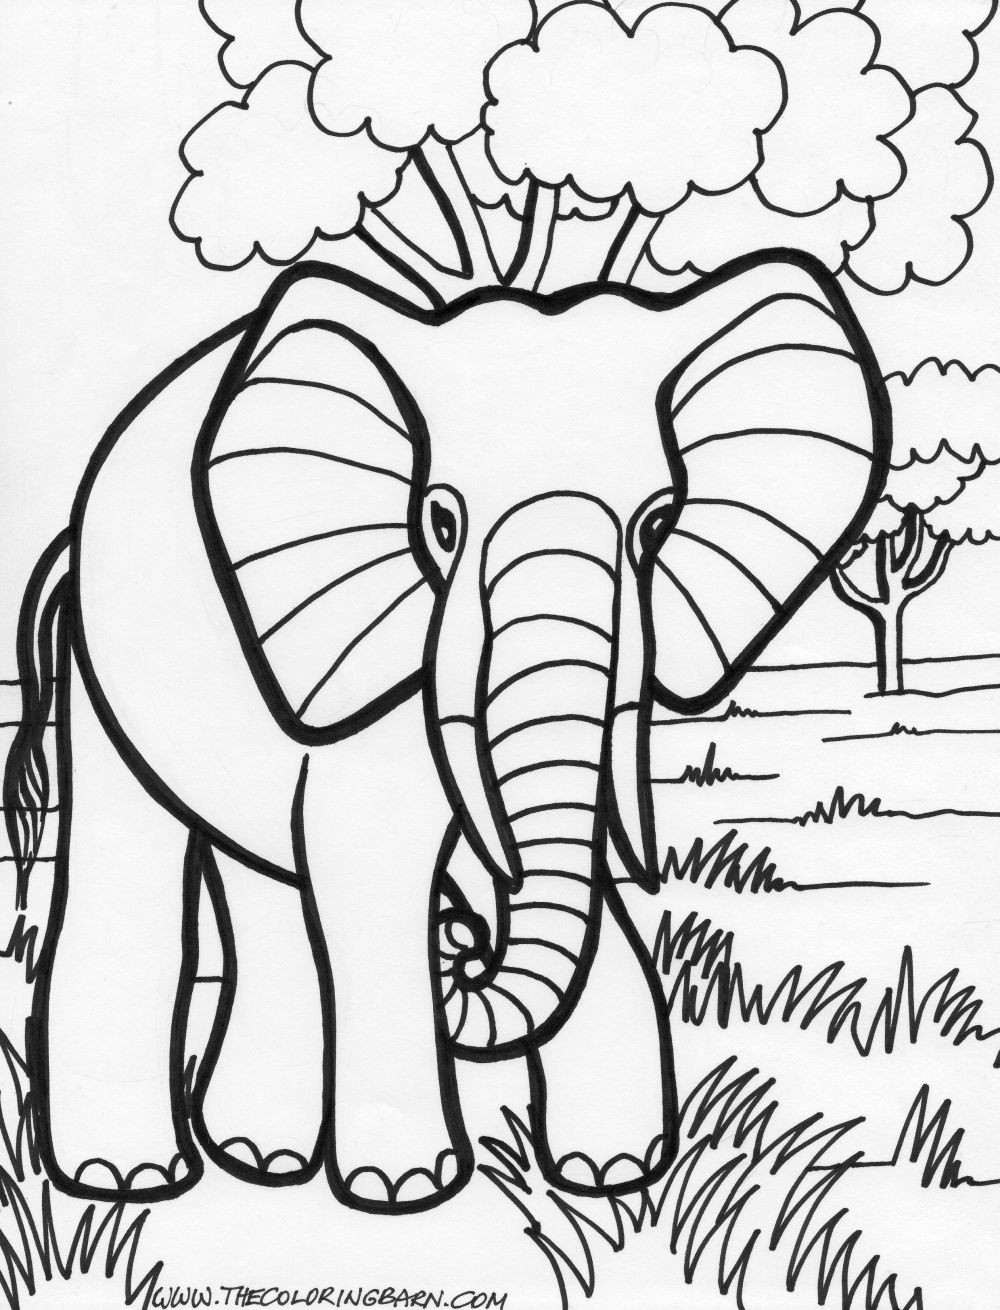 Elephant Coloring Book Pages
 Black beauty 18 Elephant coloring pages